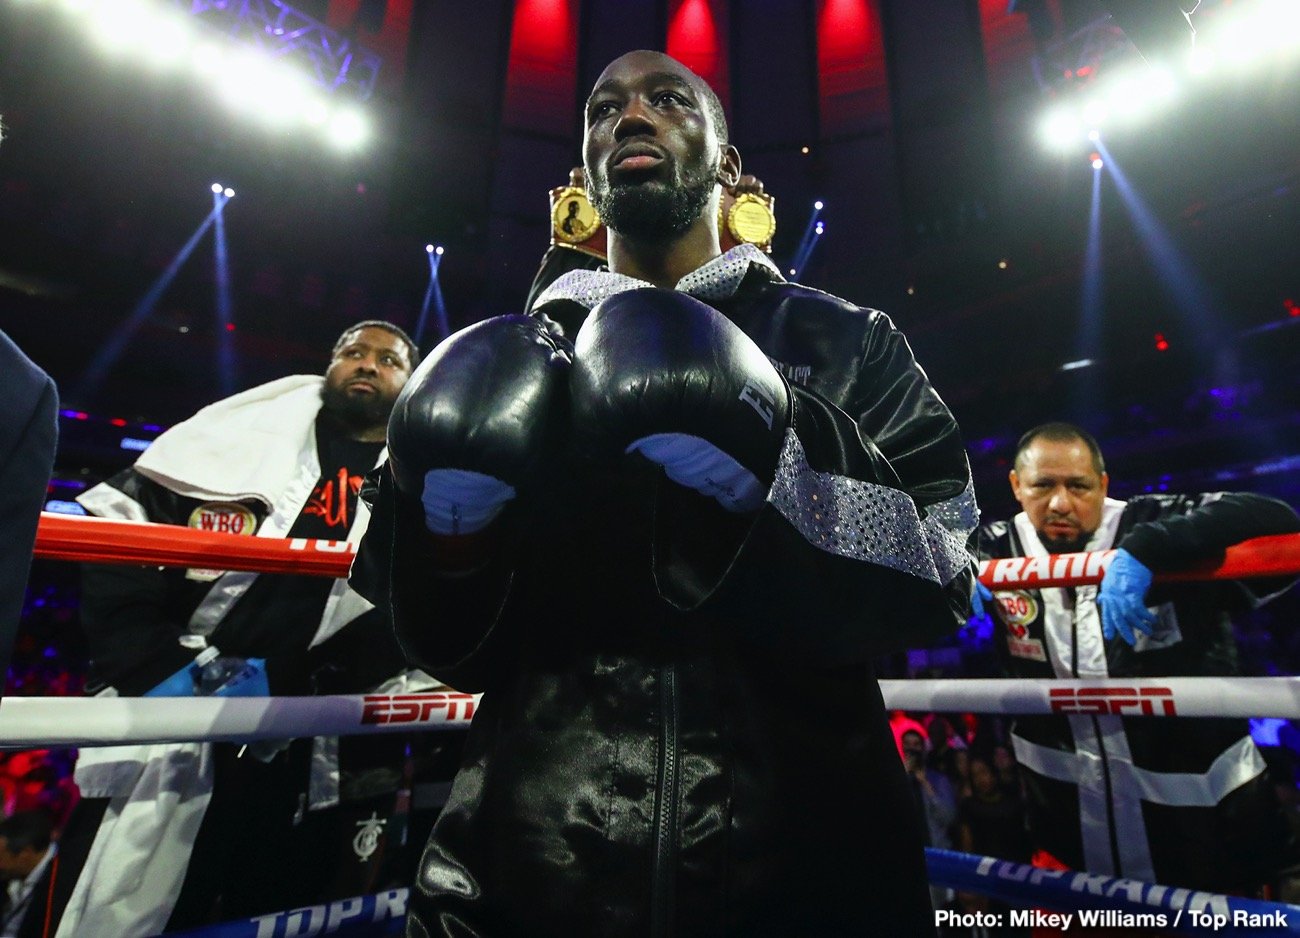 Image: Terence Crawford: 'I'll fight whoever they put in front of me'